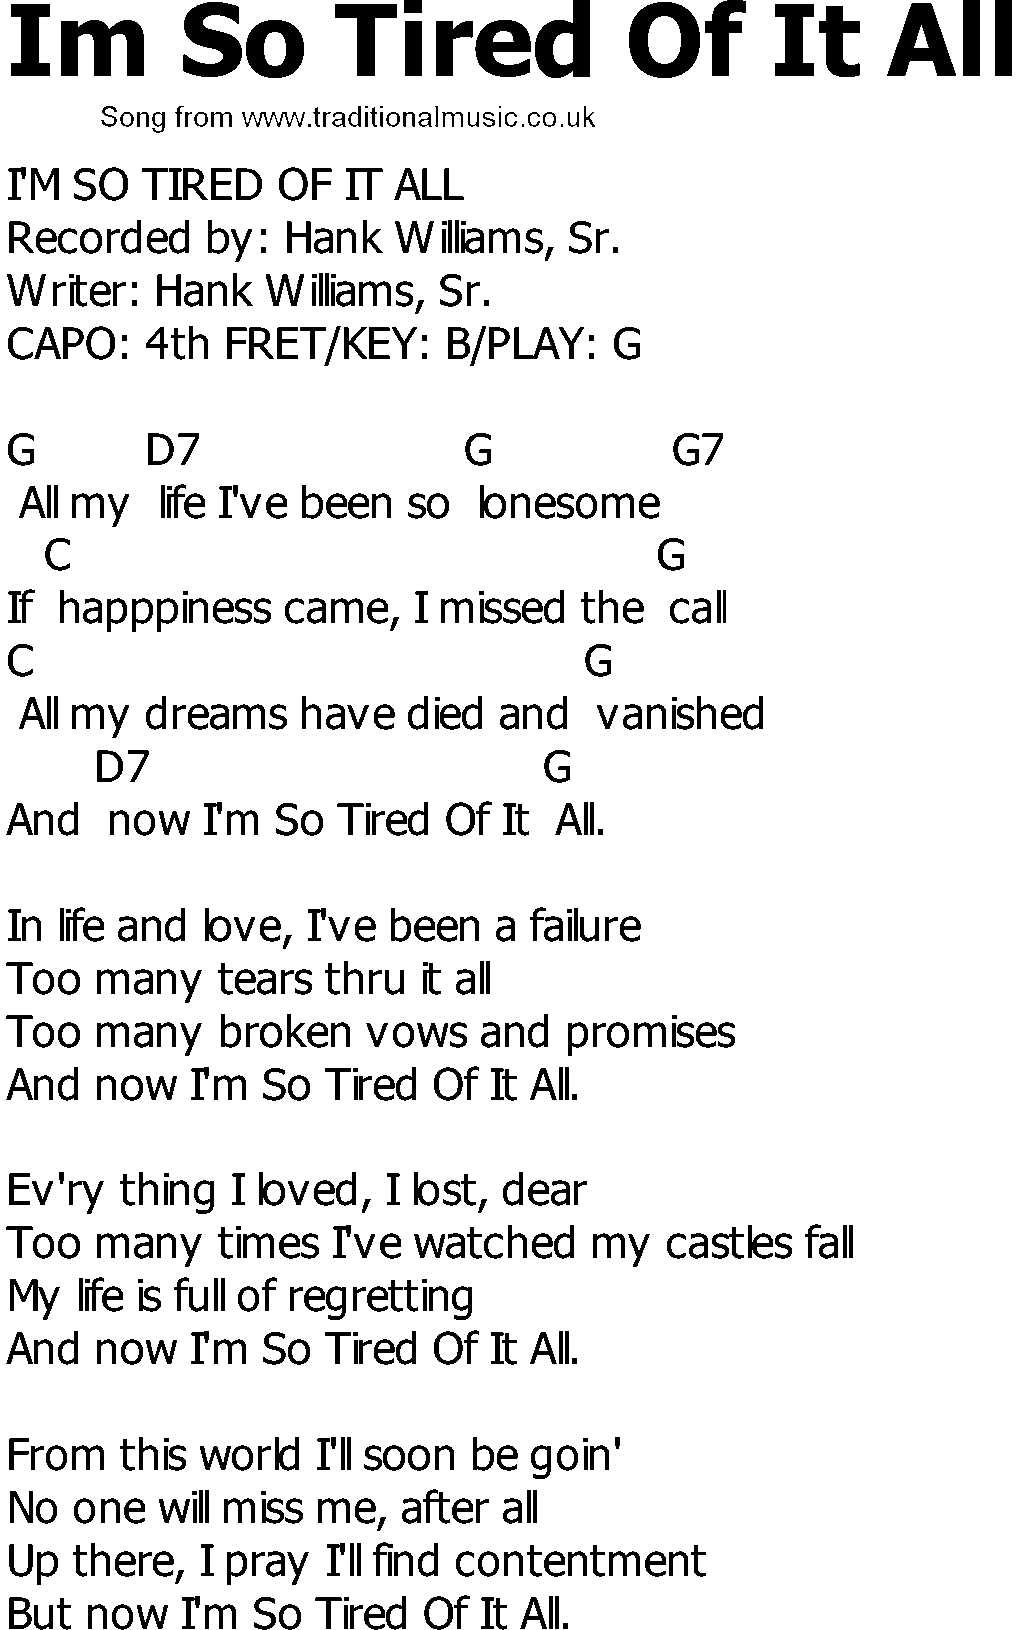 Old Country song lyrics with chords - Im So Tired Of It All